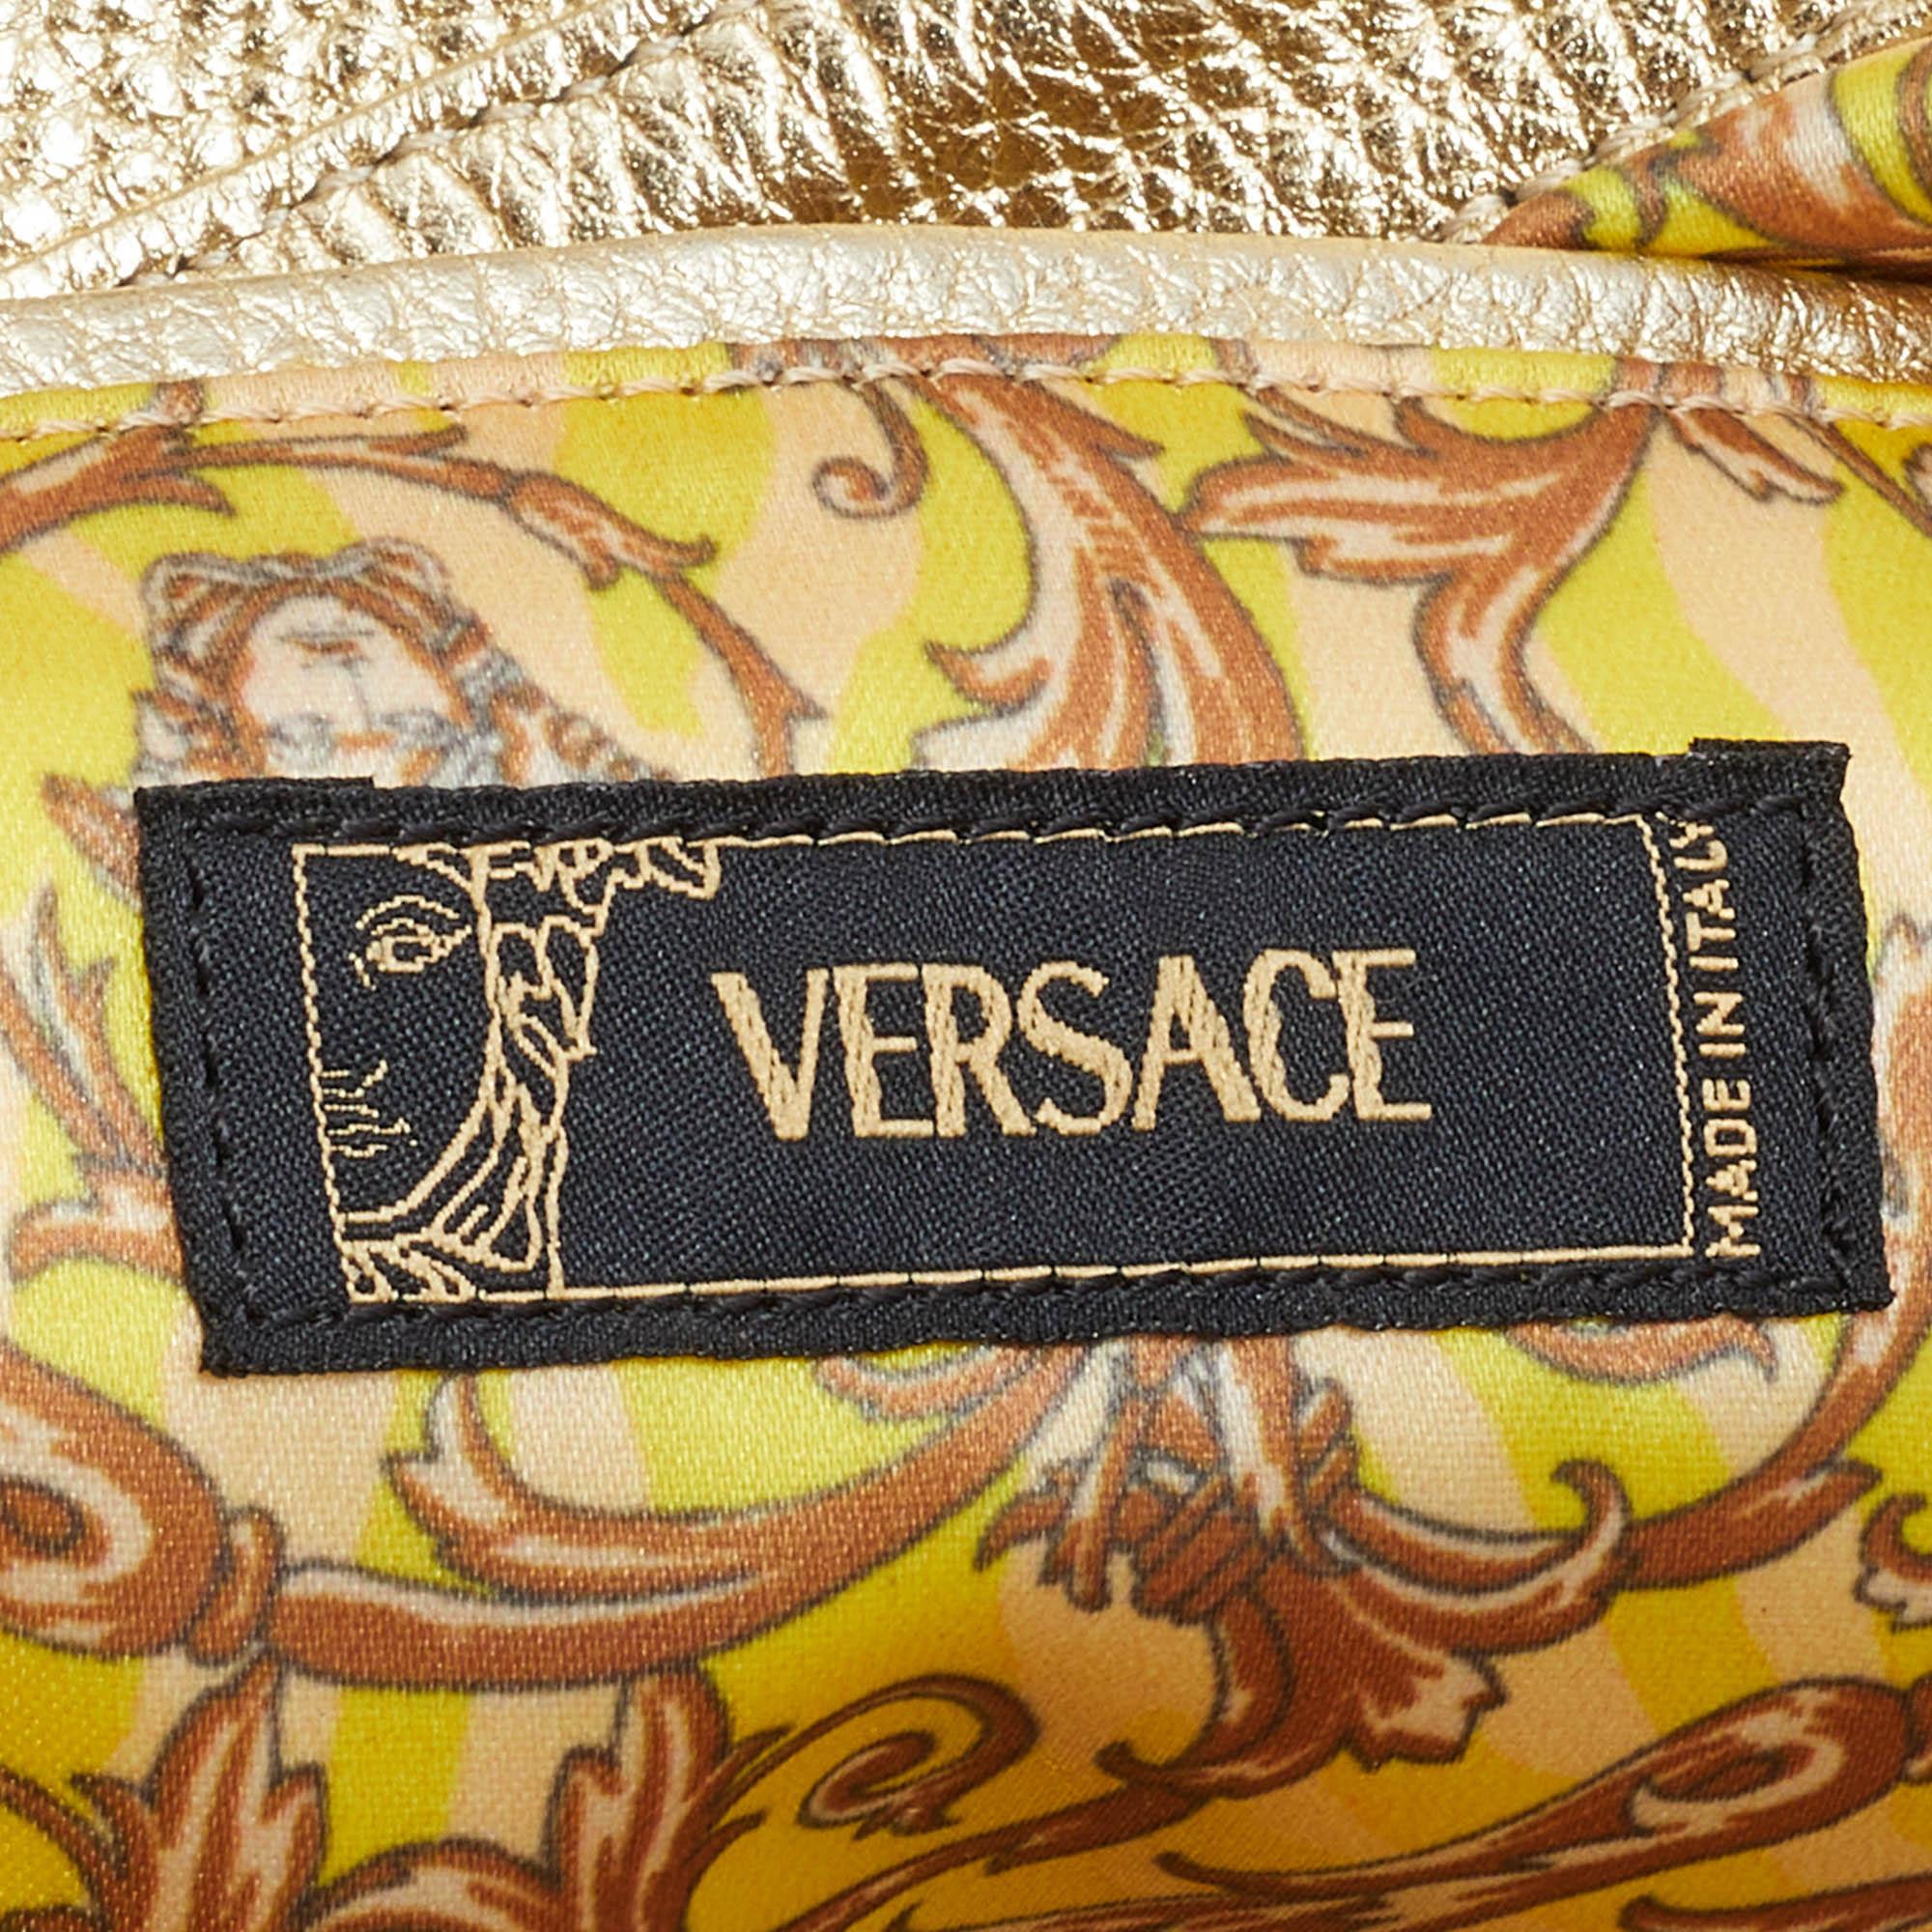 Versace Metallic Light Beige/Gold Technical Fabric and Leather Satchel 6